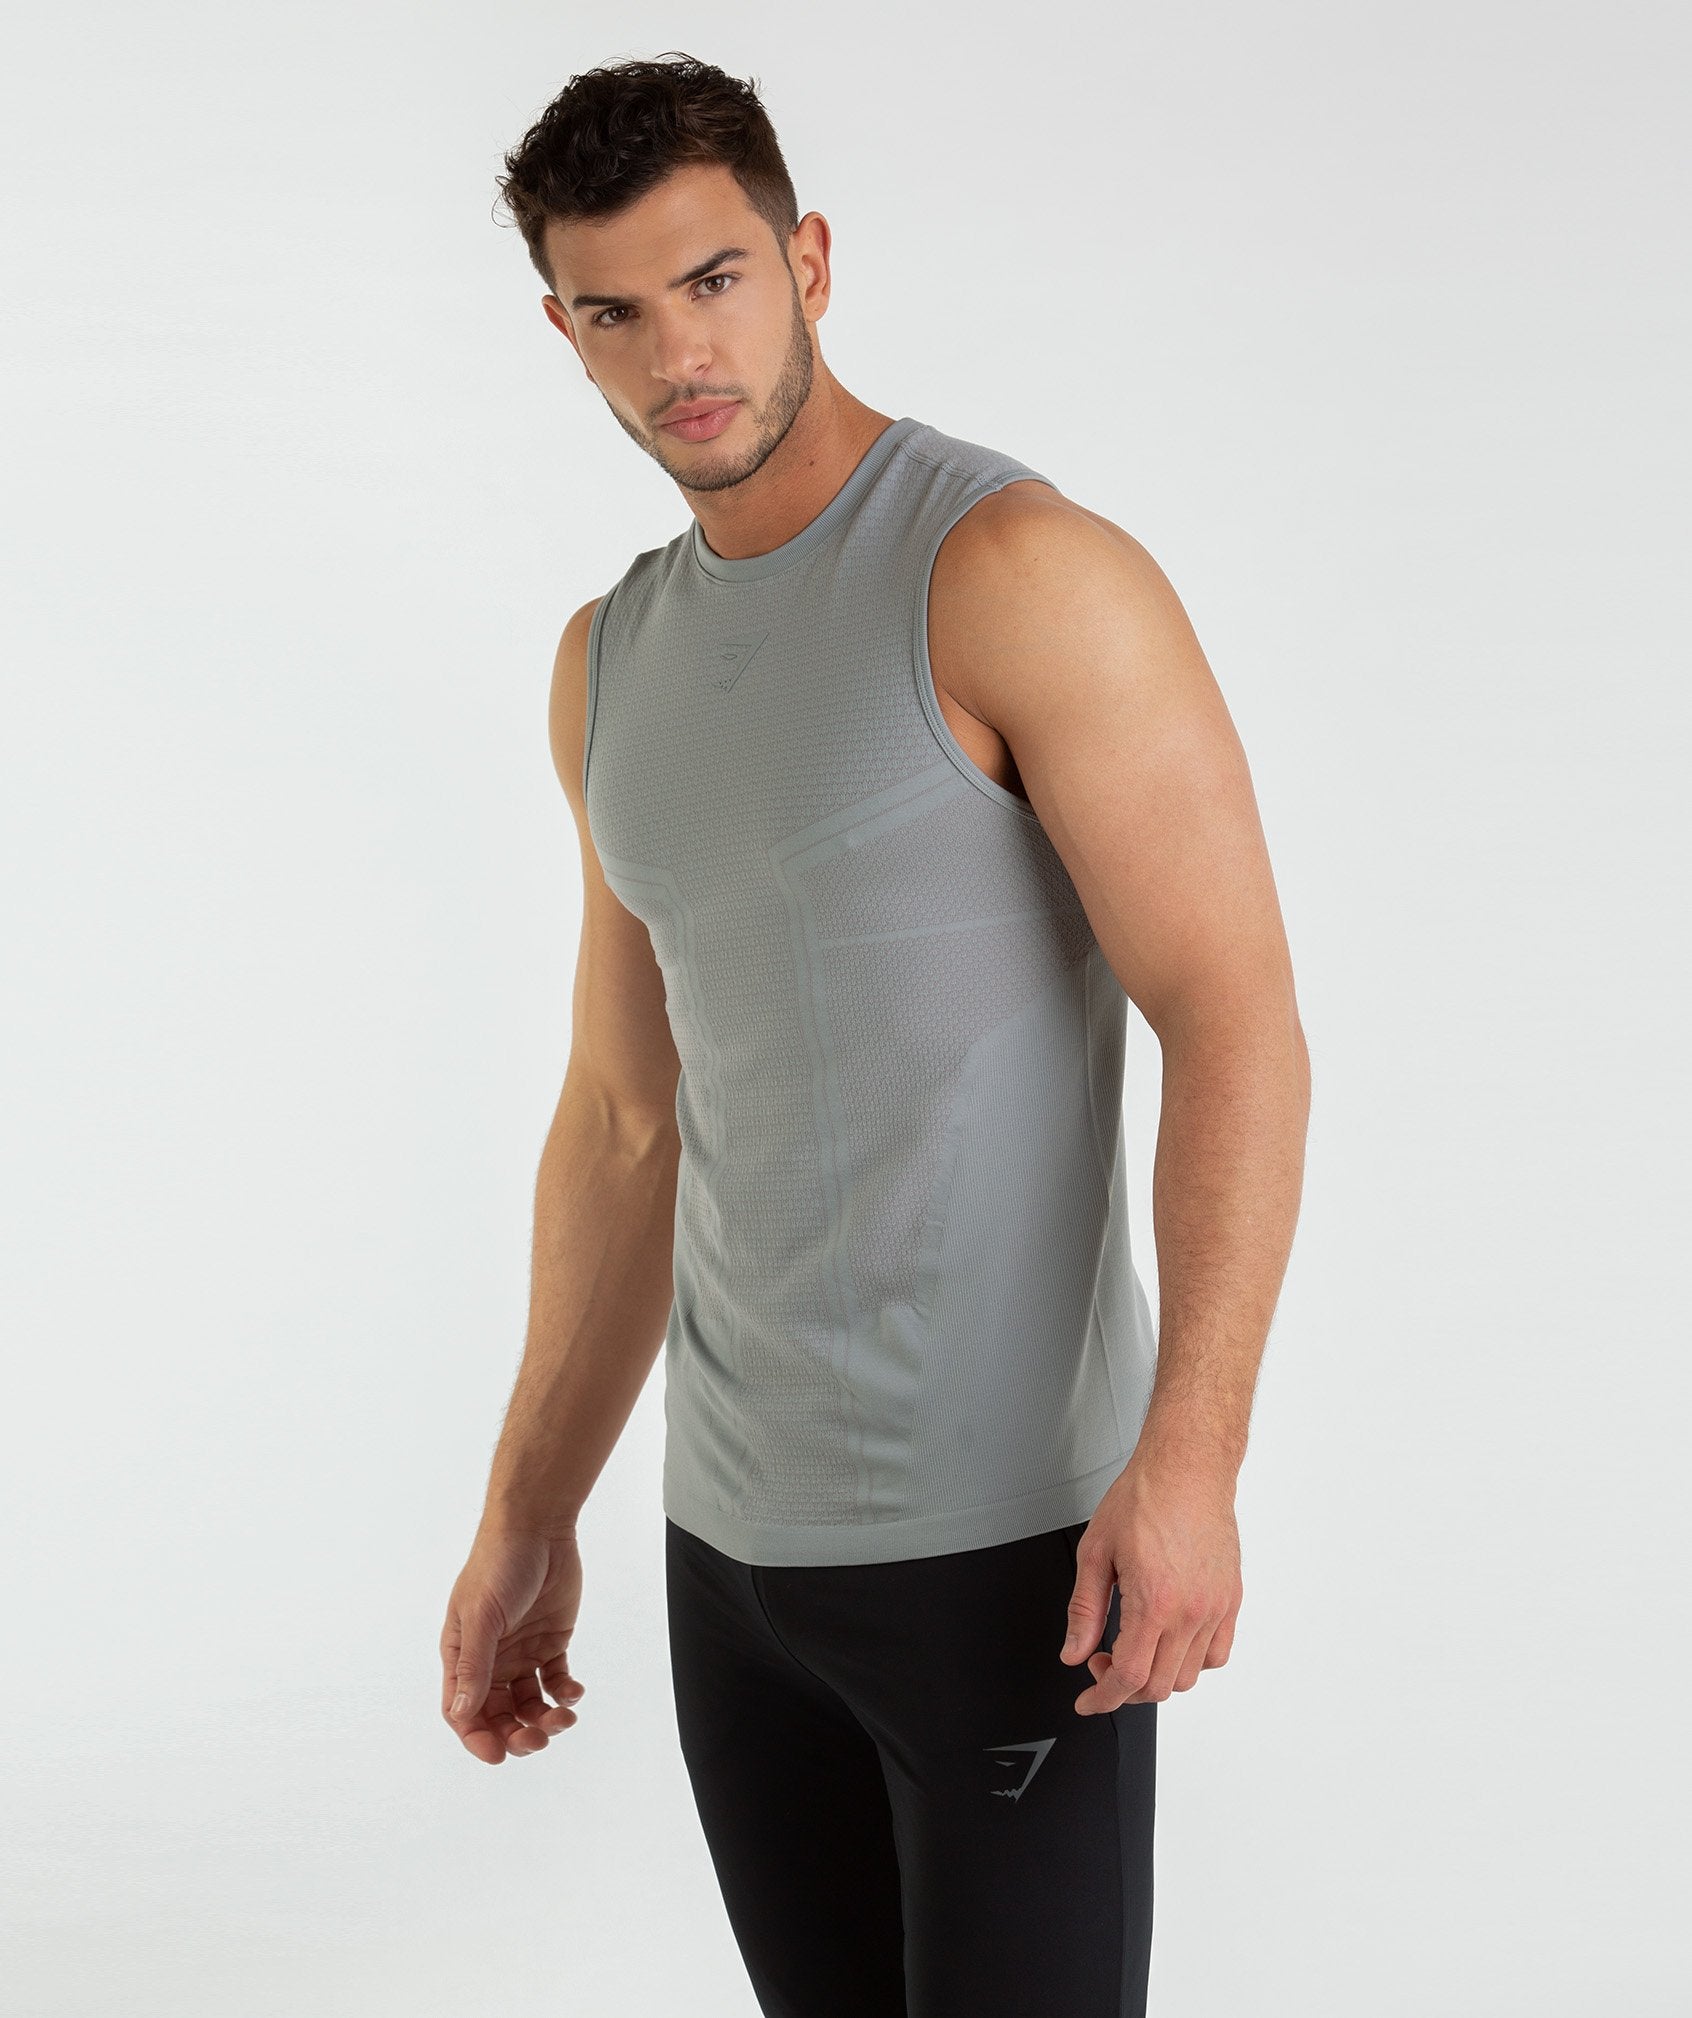 Onyx Imperial Tank in Light Grey - view 3